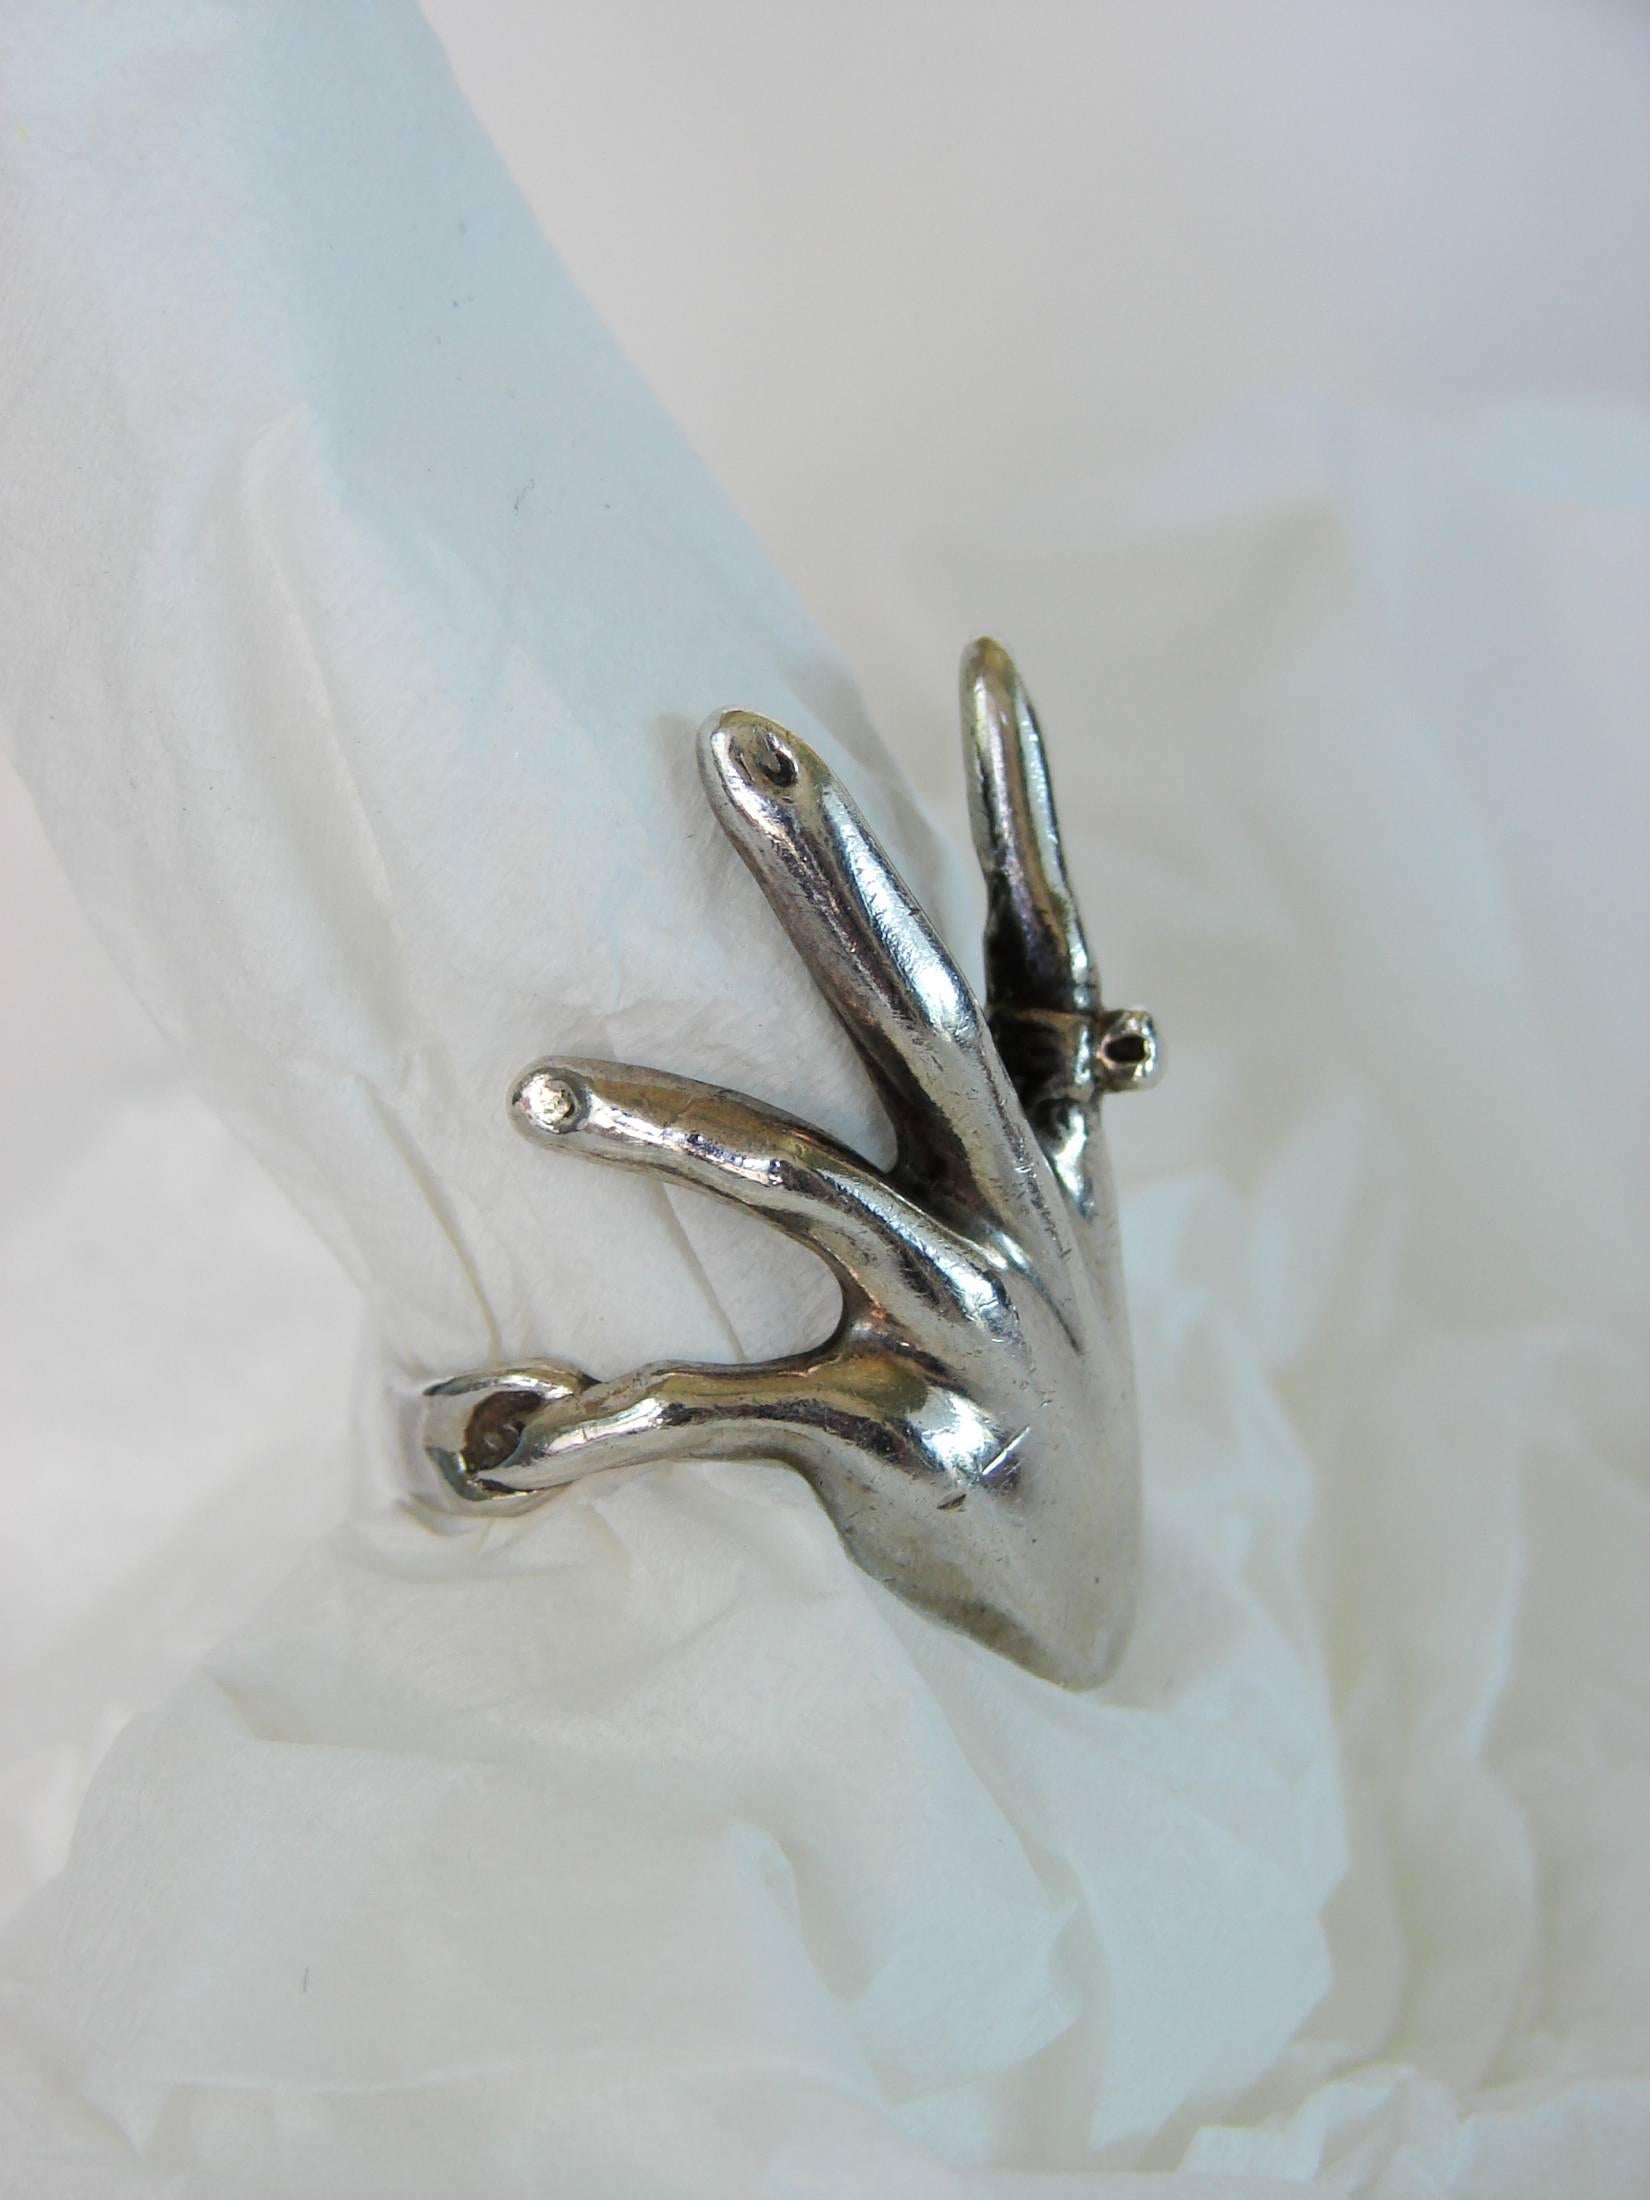 This sterling ring was custom made in the 1970s and is shaped as a human hand, complete with its own ring! One-of-a-kind and substantial in size (1.25